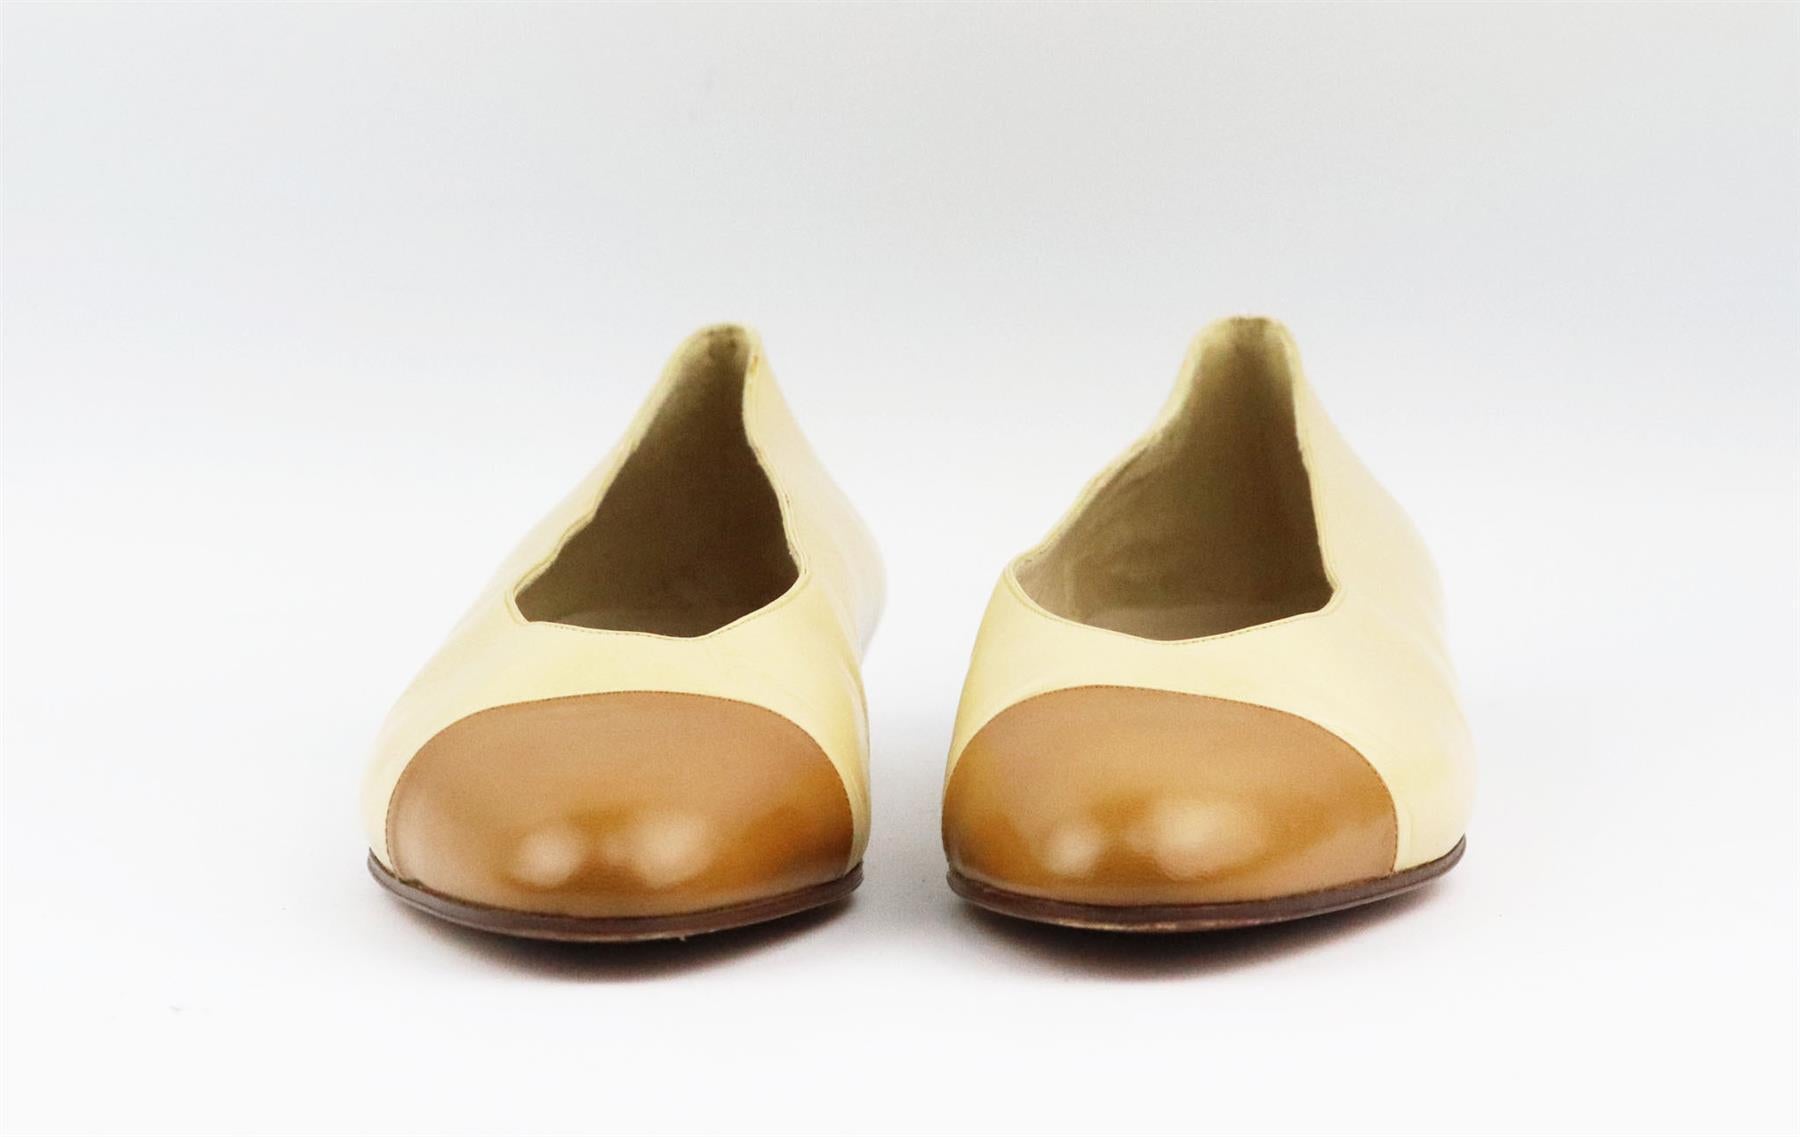 These vintage ballerina flats by Chanel are always stand out pieces, even designs as classic as these flats, made in Italy from beige leather and tan leather toe cap that are balanced out with an almond toe. Sole measures approximately 10 mm/ 0.4